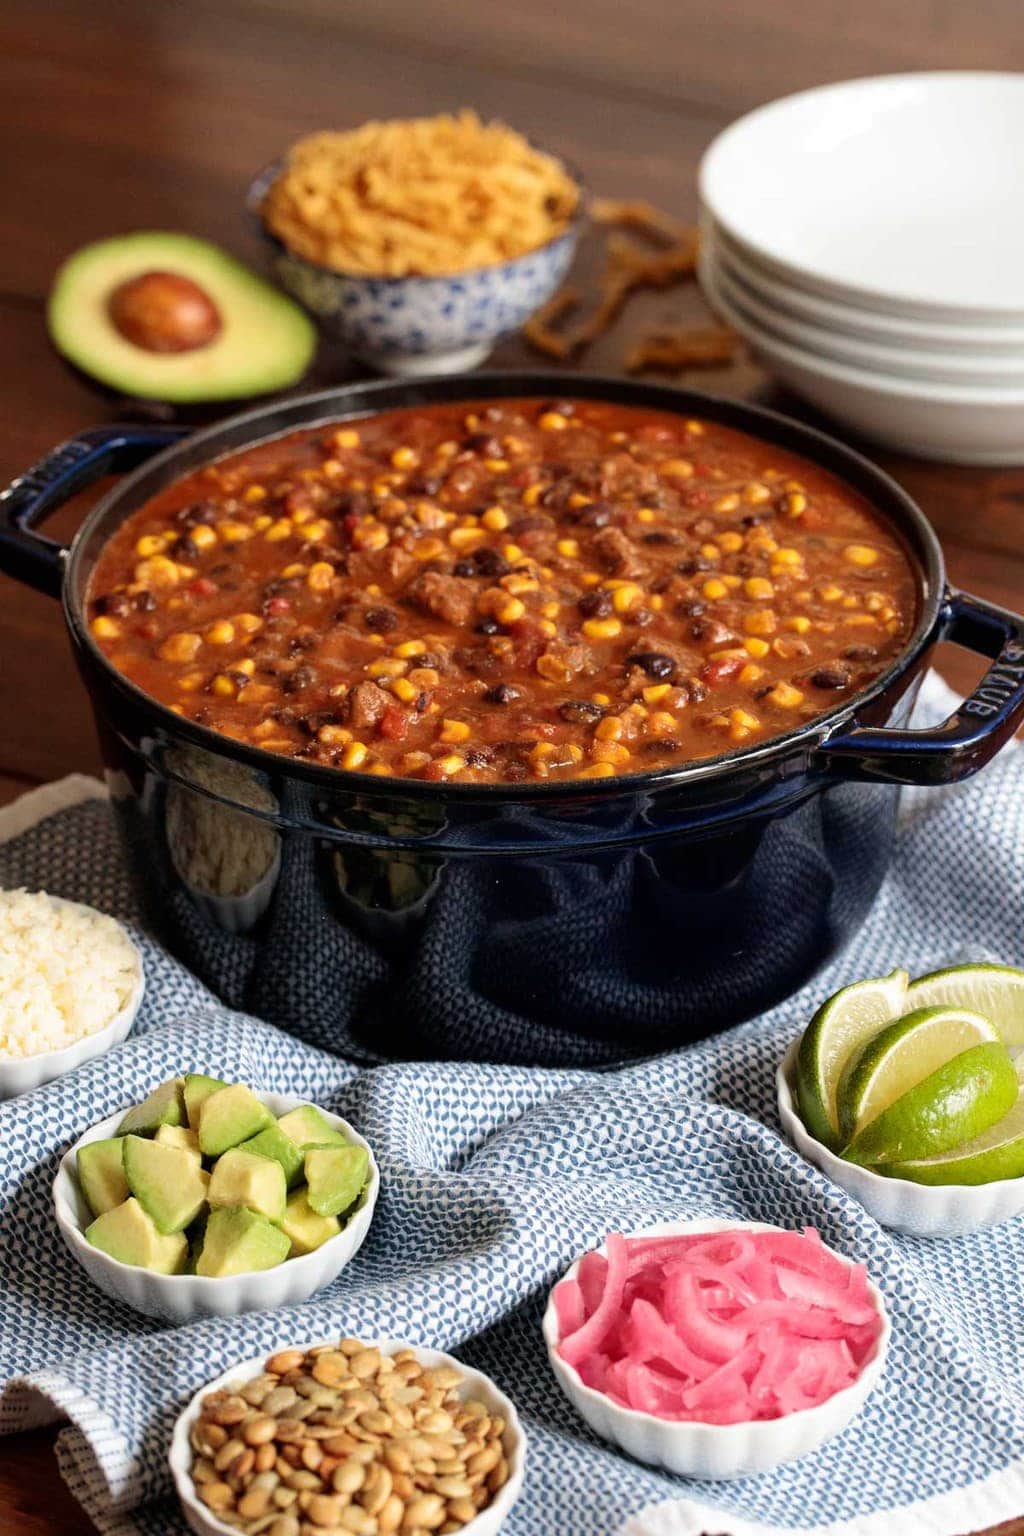 Photo of a large Staub pot of Instant Pot Black Bean Beef Tortilla Soup surrounded by small white bowls of garnish ingredients and an avocado sliced in half.